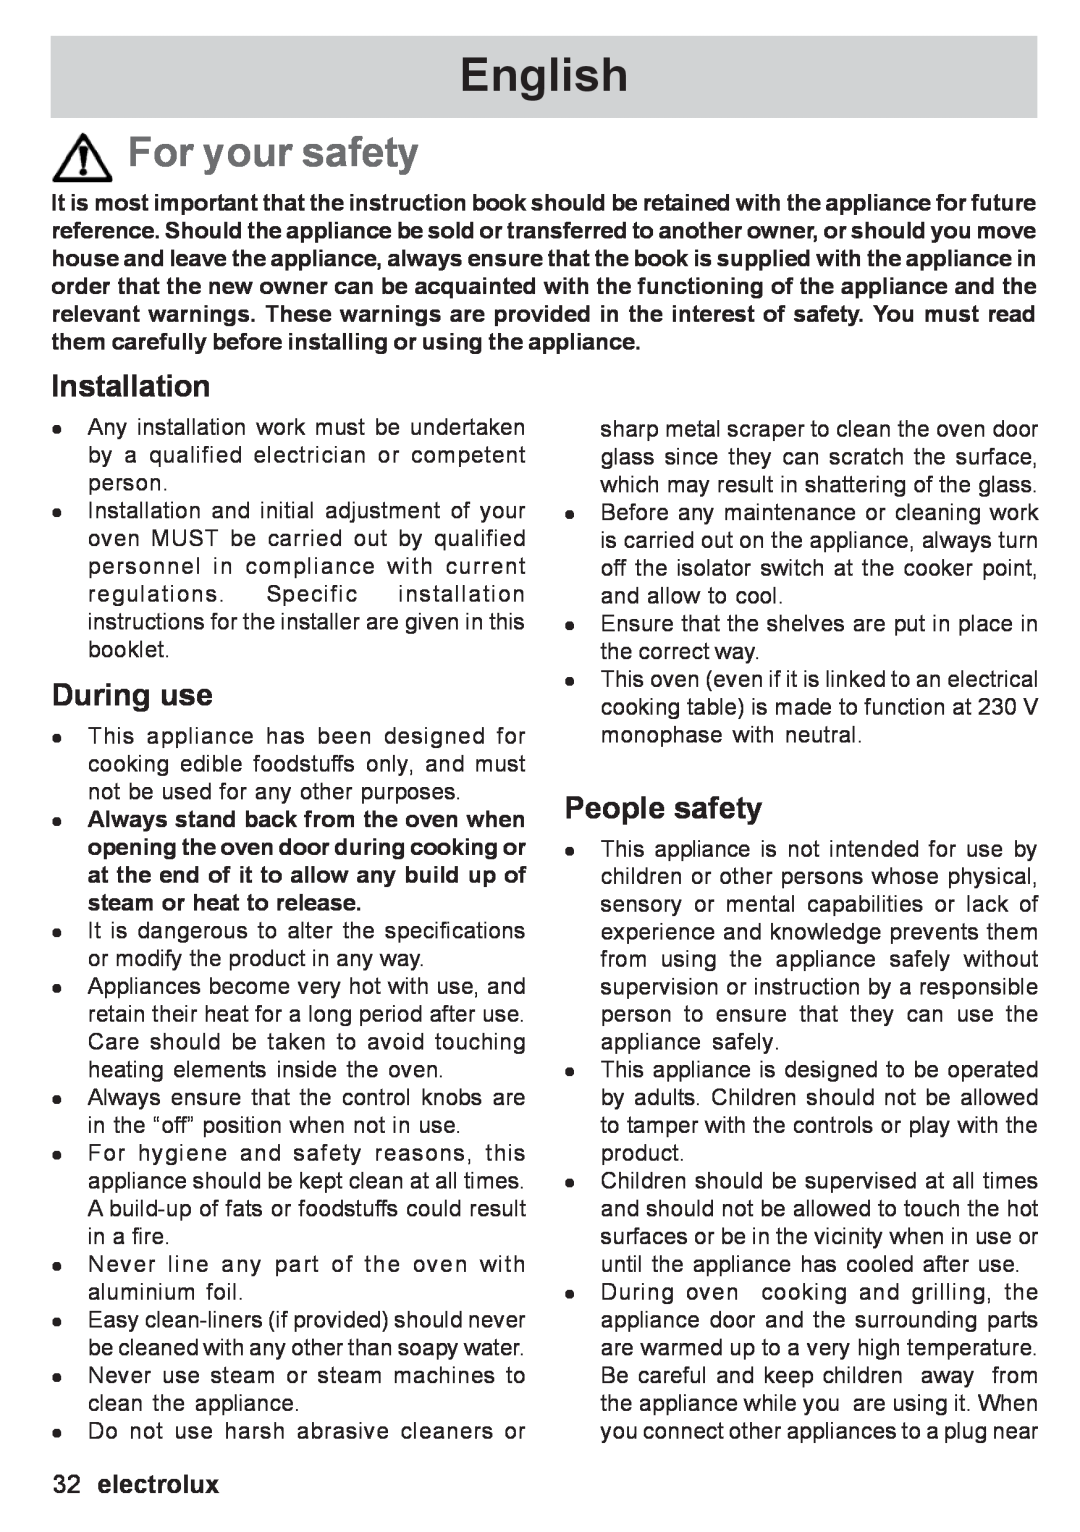 Electrolux EOB 53003 user manual English, For your safety, During use, People safety, electrolux, Installation 